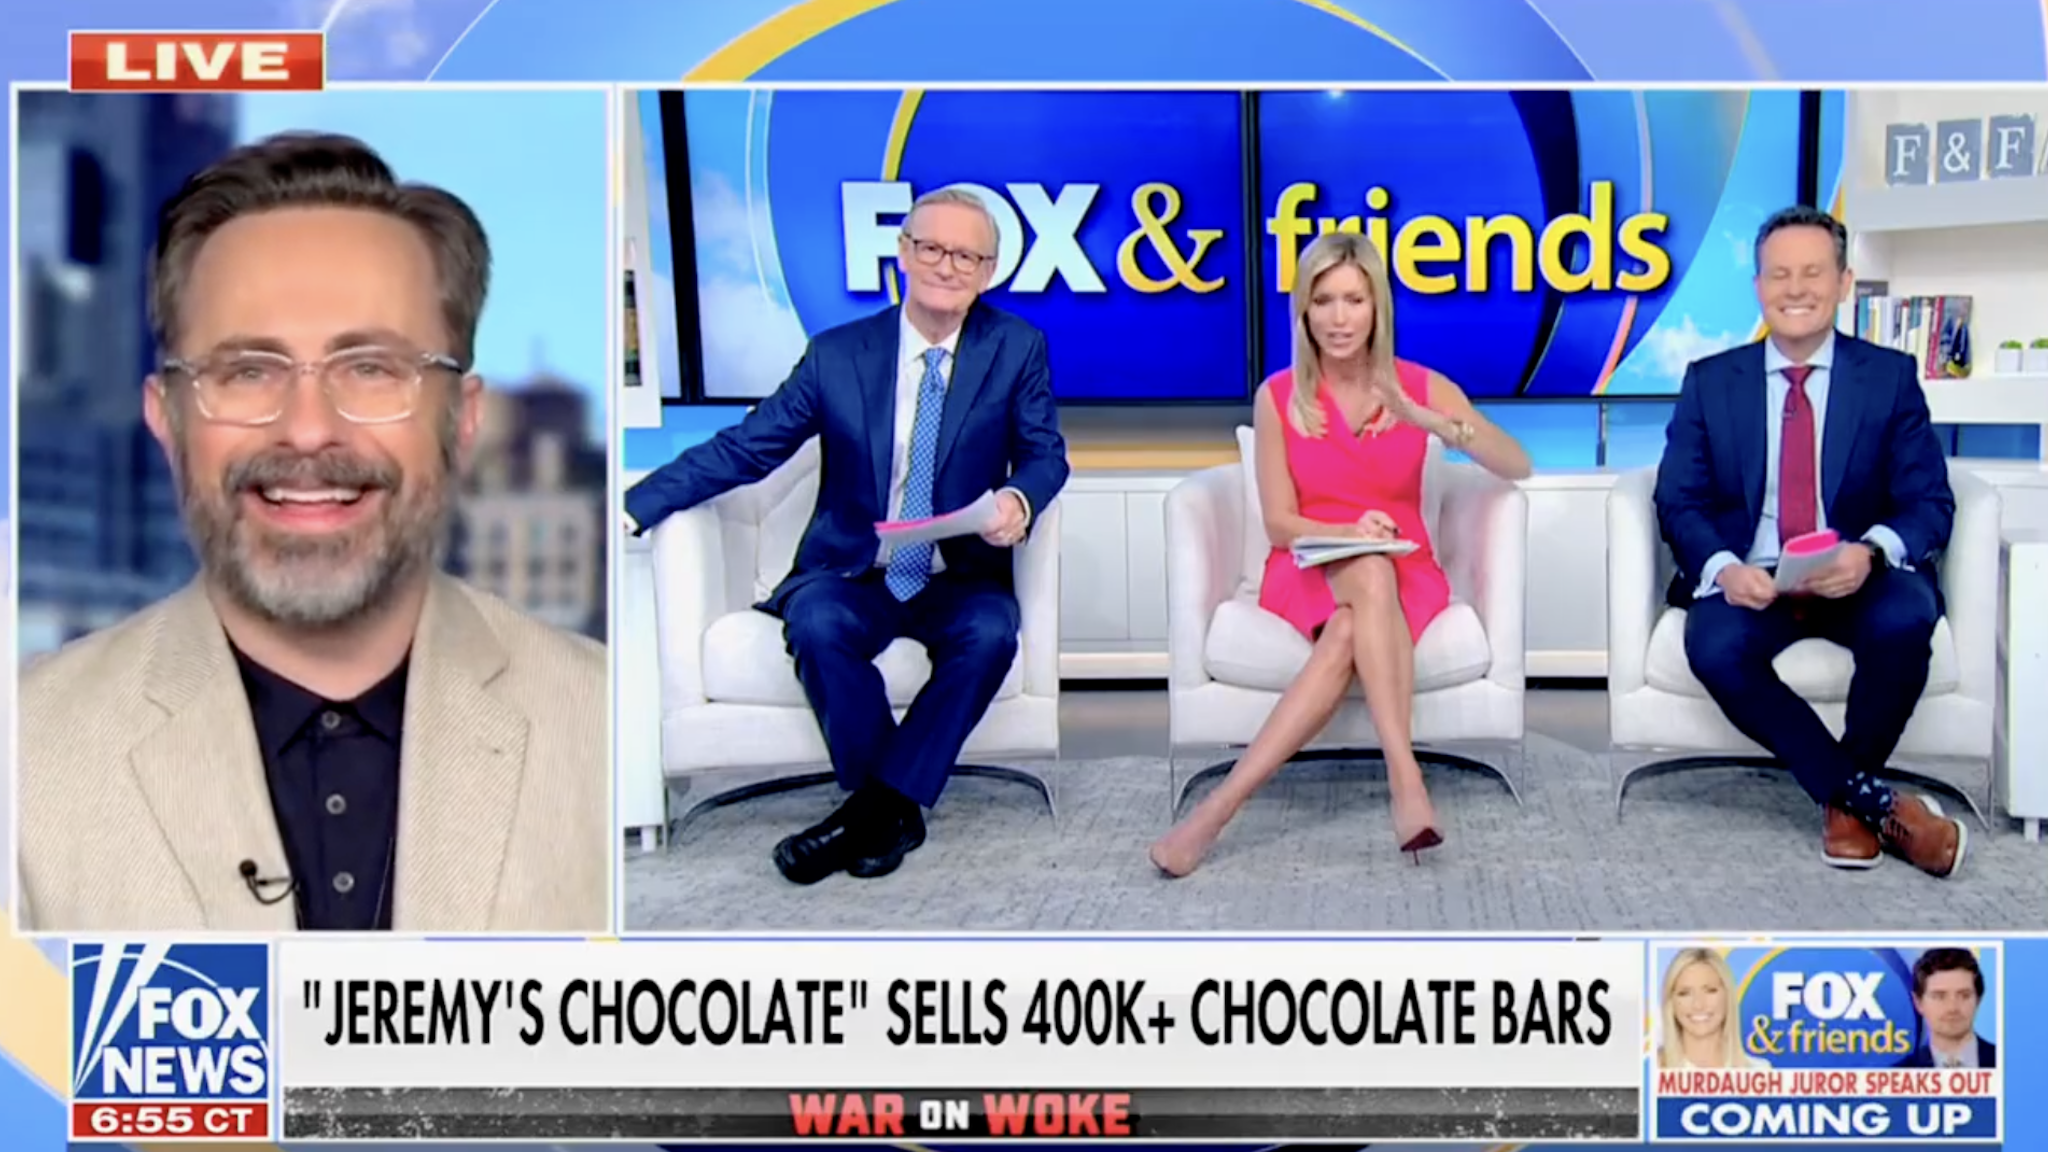 Daily Wire co-founder Jeremy Boreing told “Fox & Friends” Tuesday morning how the woke left helped him literally become an overnight success in the chocolate business.